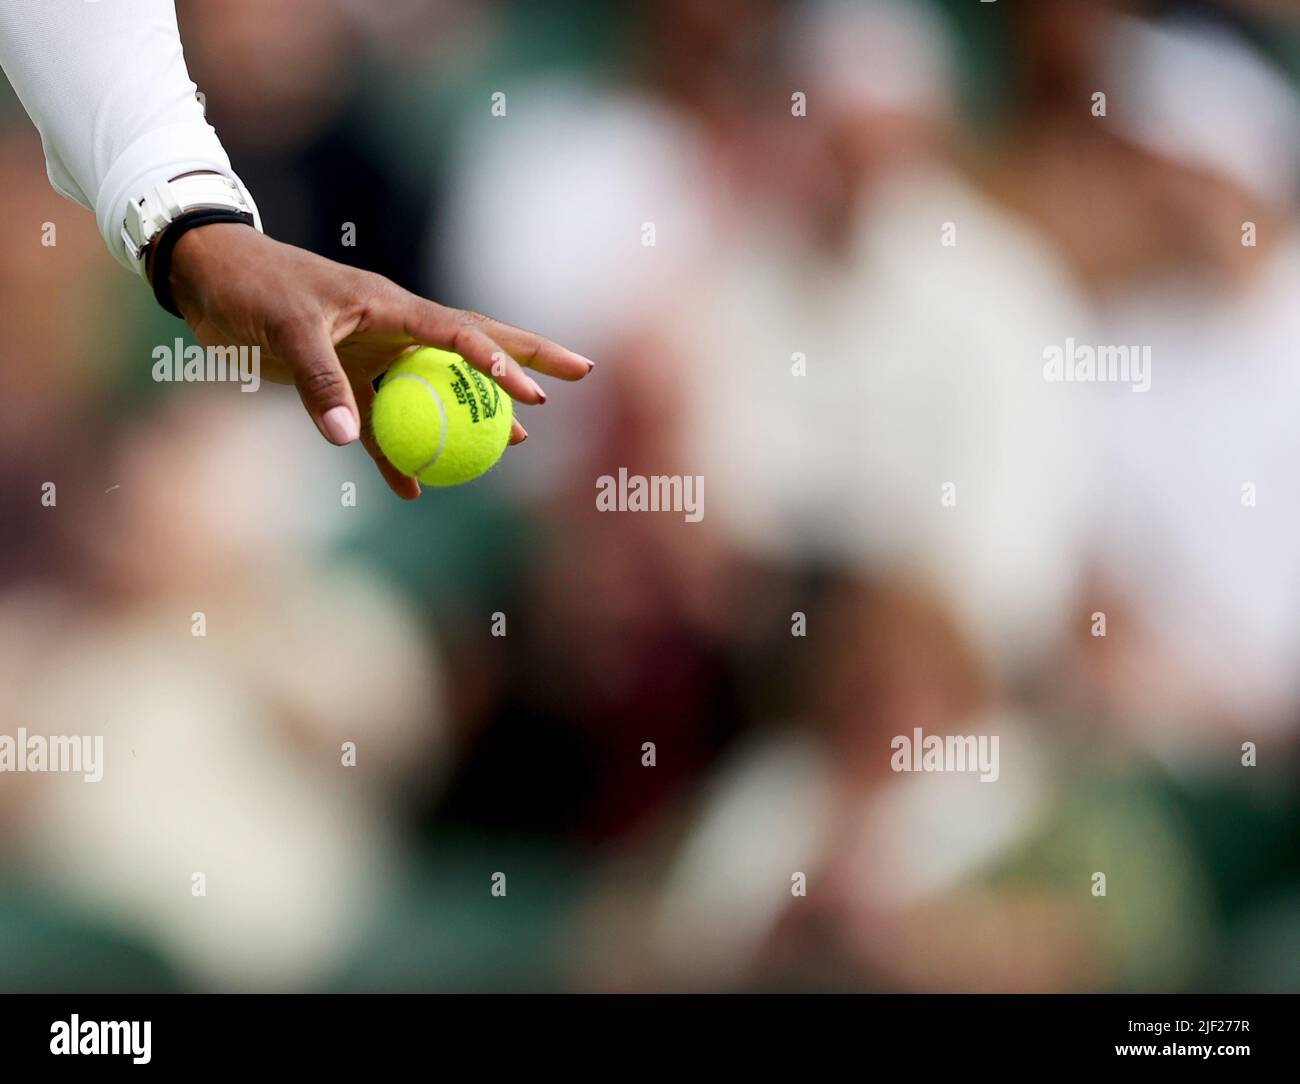 London, Britain. 28th June, 2022. Serena Williams prepares for serving during the women's singles first round match between Serena Williams of the United States and Harmony Tan of France at Wimbledon Tennis Championship in London, Britain, on June 28, 2022. Credit: Li Ying/Xinhua/Alamy Live News Stock Photo